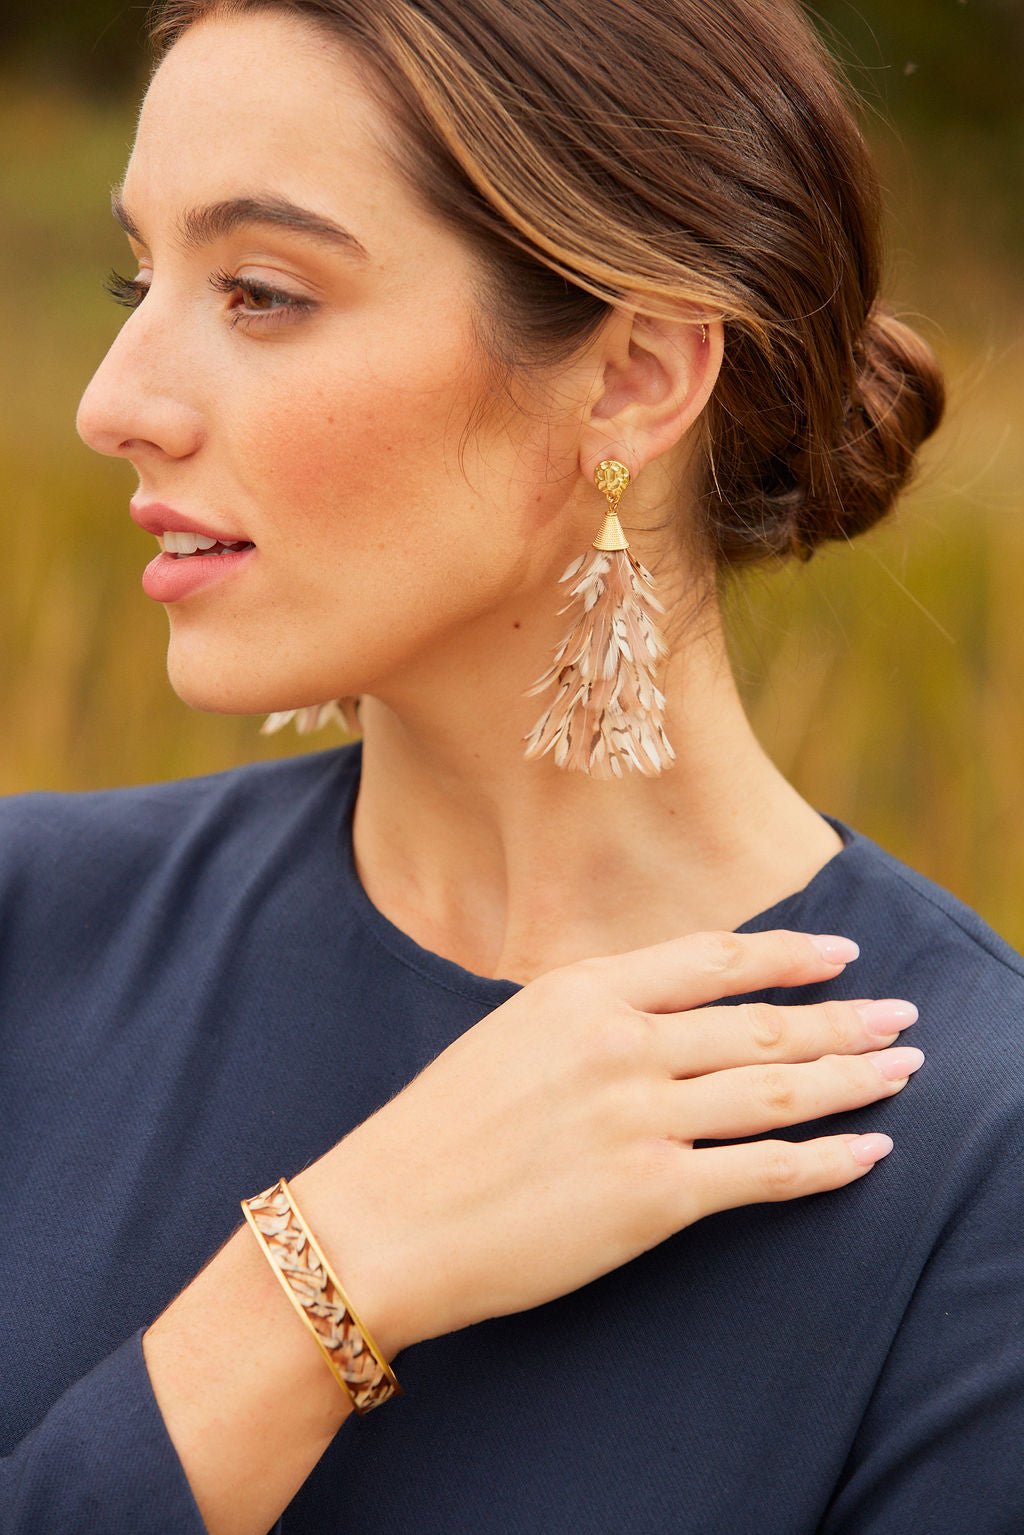 Anna Feather Earrings - Jewelry - Huck & Paddle